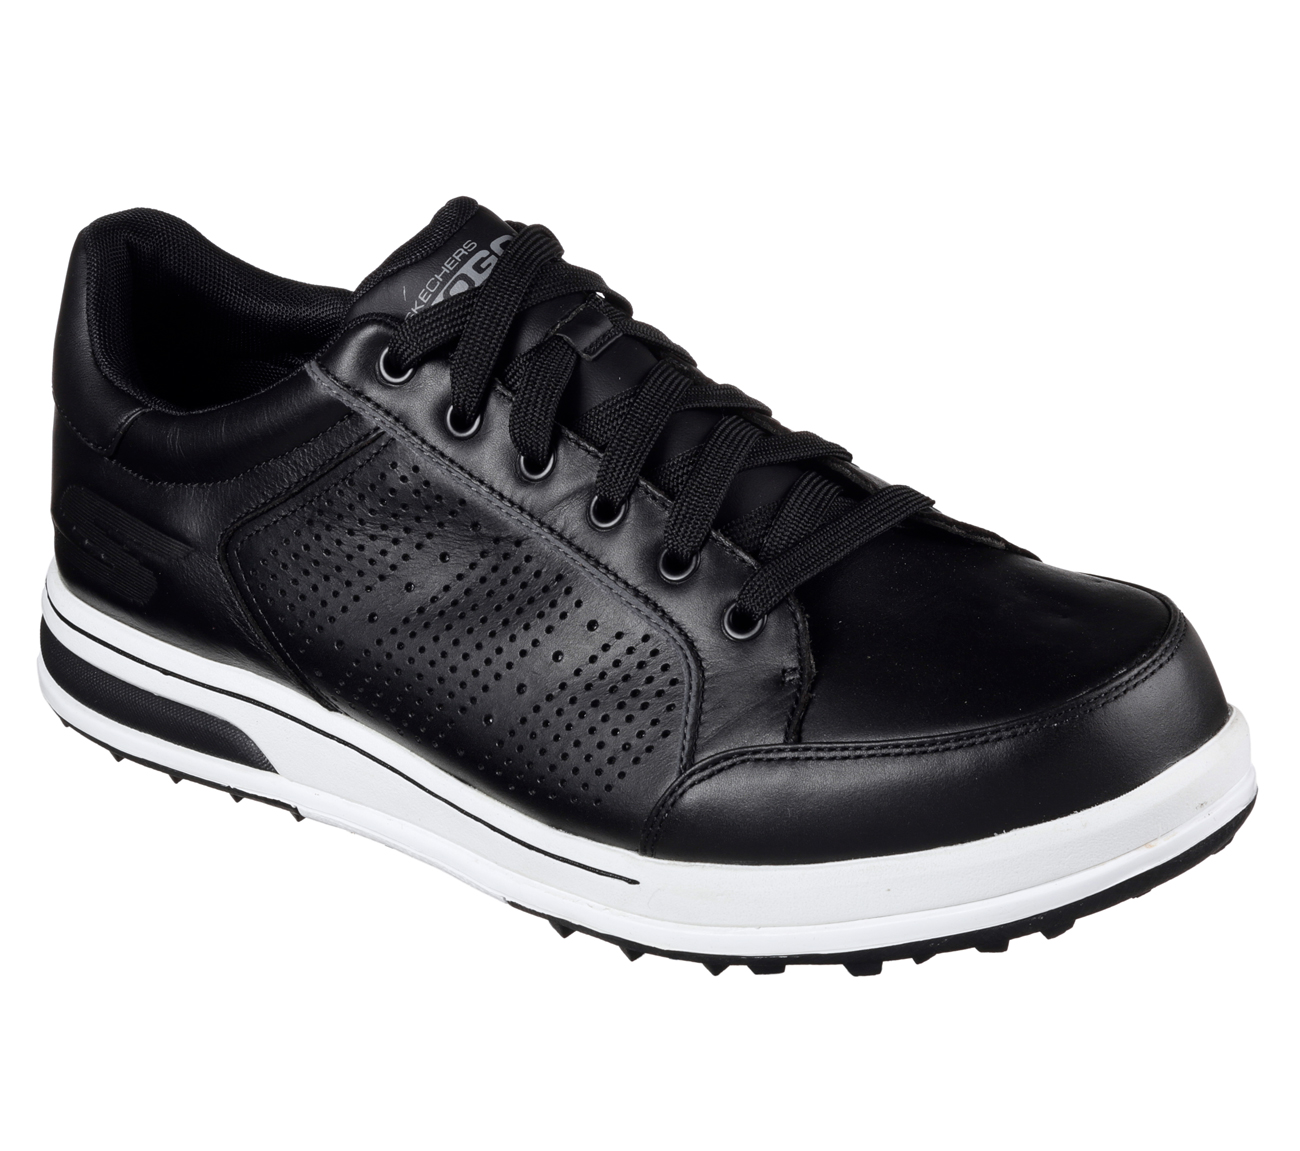 skechers go golf drive 2 review